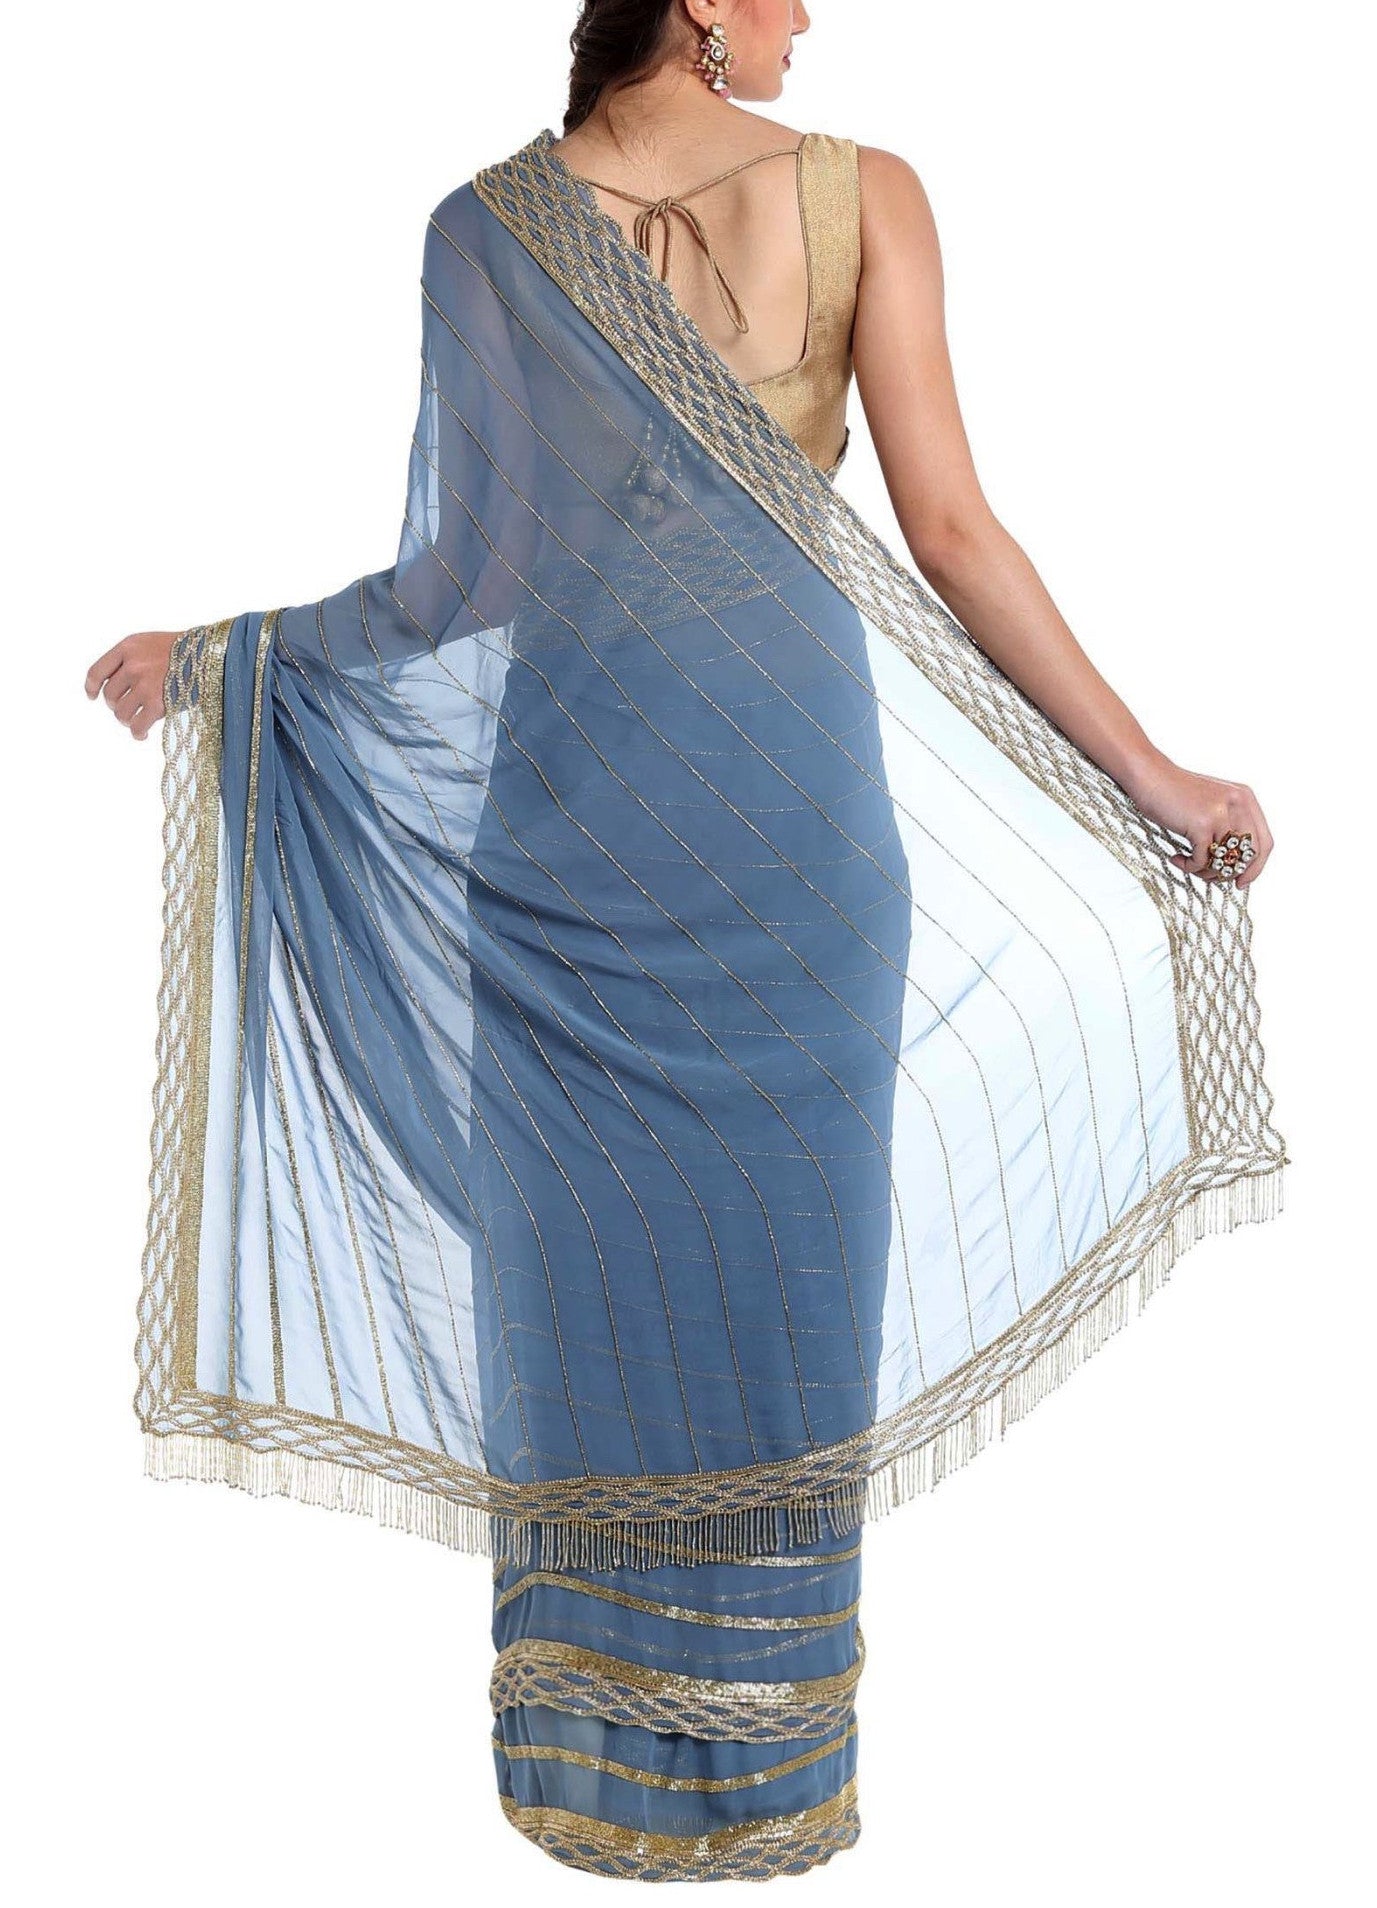 Sky Blue Embellished Saree - Indian Clothing in Denver, CO, Aurora, CO, Boulder, CO, Fort Collins, CO, Colorado Springs, CO, Parker, CO, Highlands Ranch, CO, Cherry Creek, CO, Centennial, CO, and Longmont, CO. Nationwide shipping USA - India Fashion X